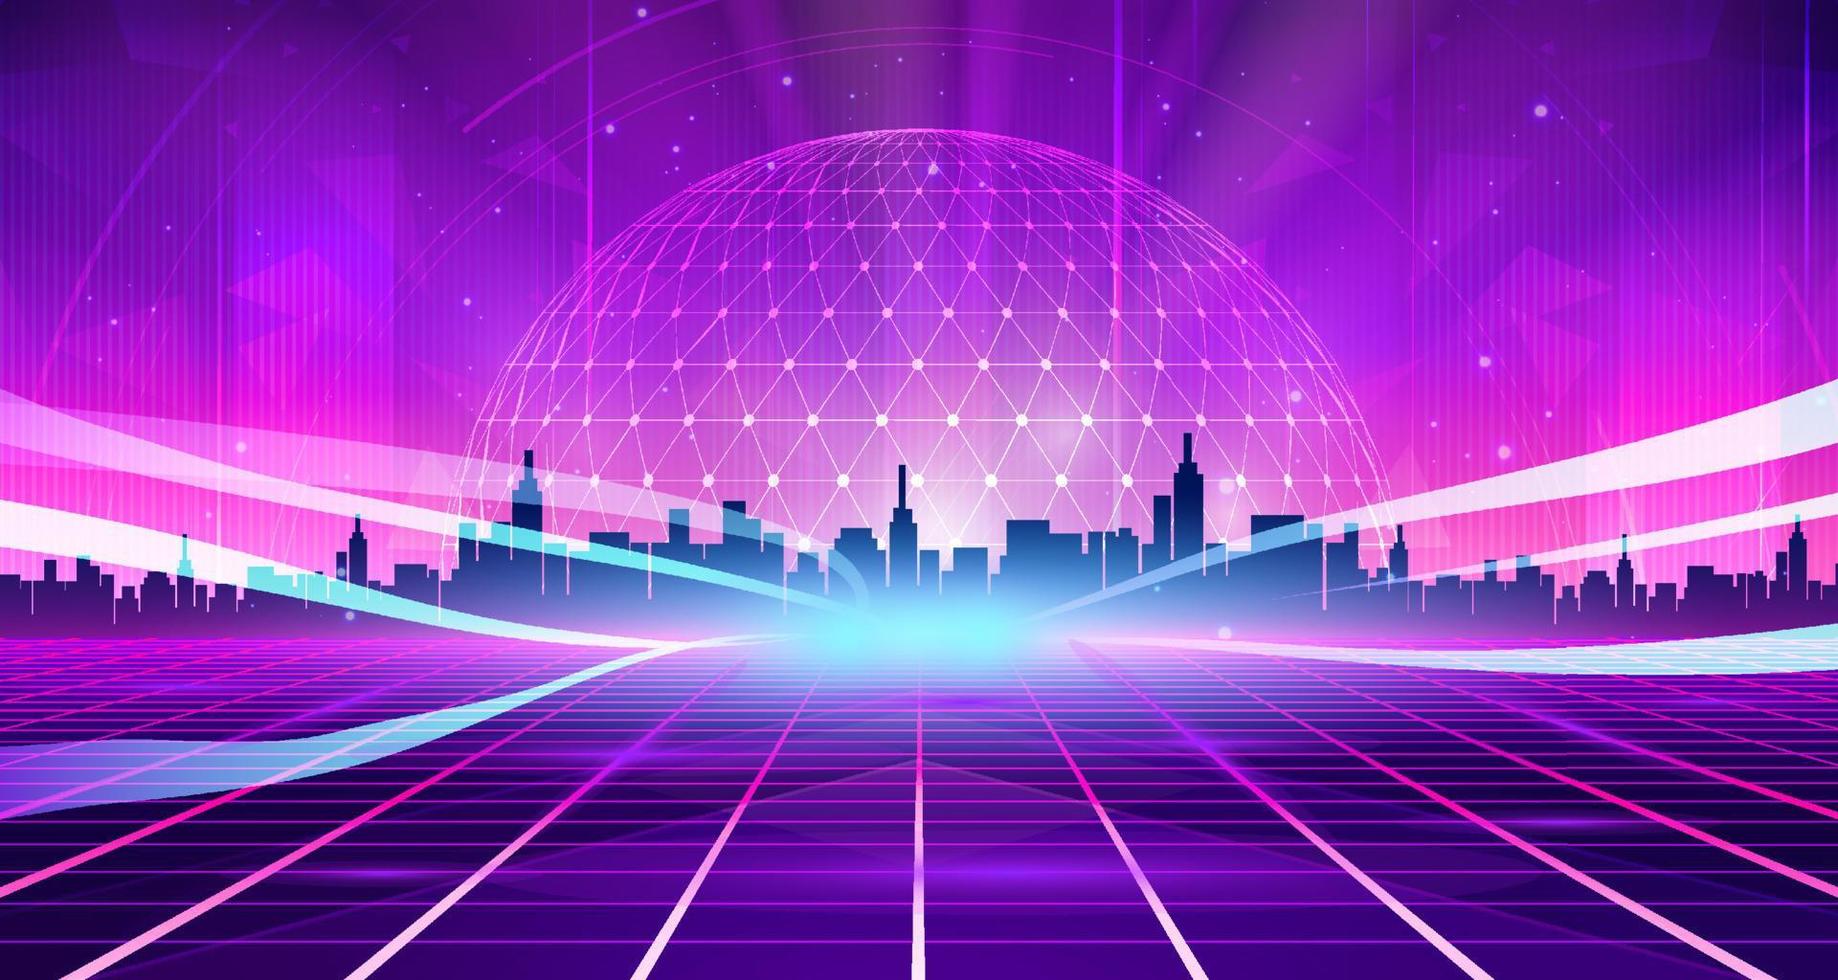 Digital technology metaverse neon blue pink purple background, cyber information, abstract speed connect communication, retro future meta tech, internet network connection, Ai big data illustration 3d vector